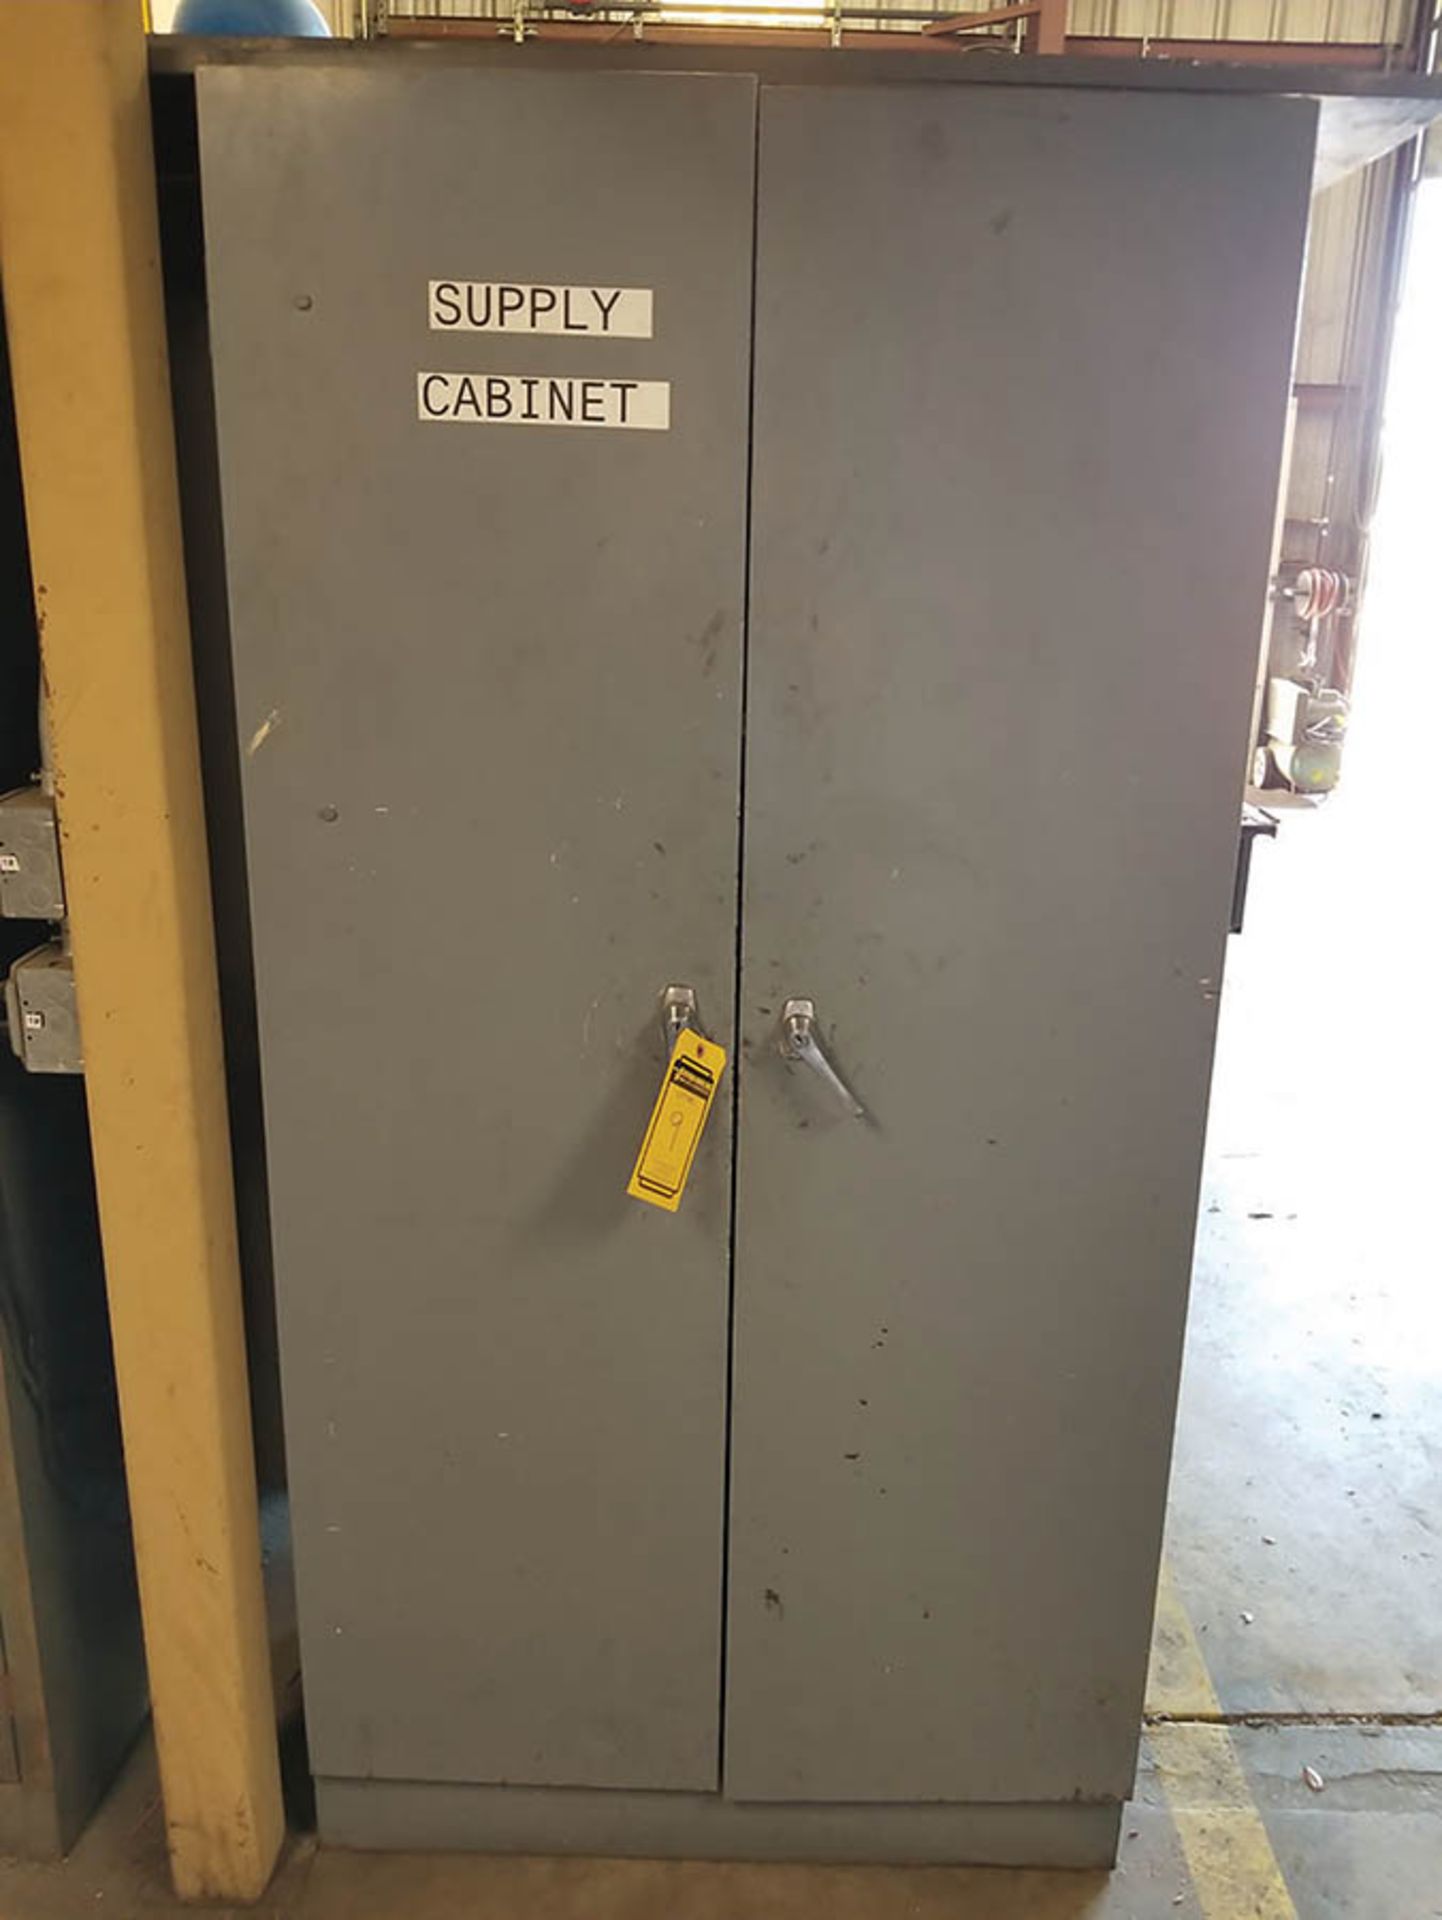 METAL SUPPLY CABINET WITH FLASHLIGHTS, TAPE MEASURE, GLOVES, JUMPER CABLES, NUMBER STAMPS, JOINT